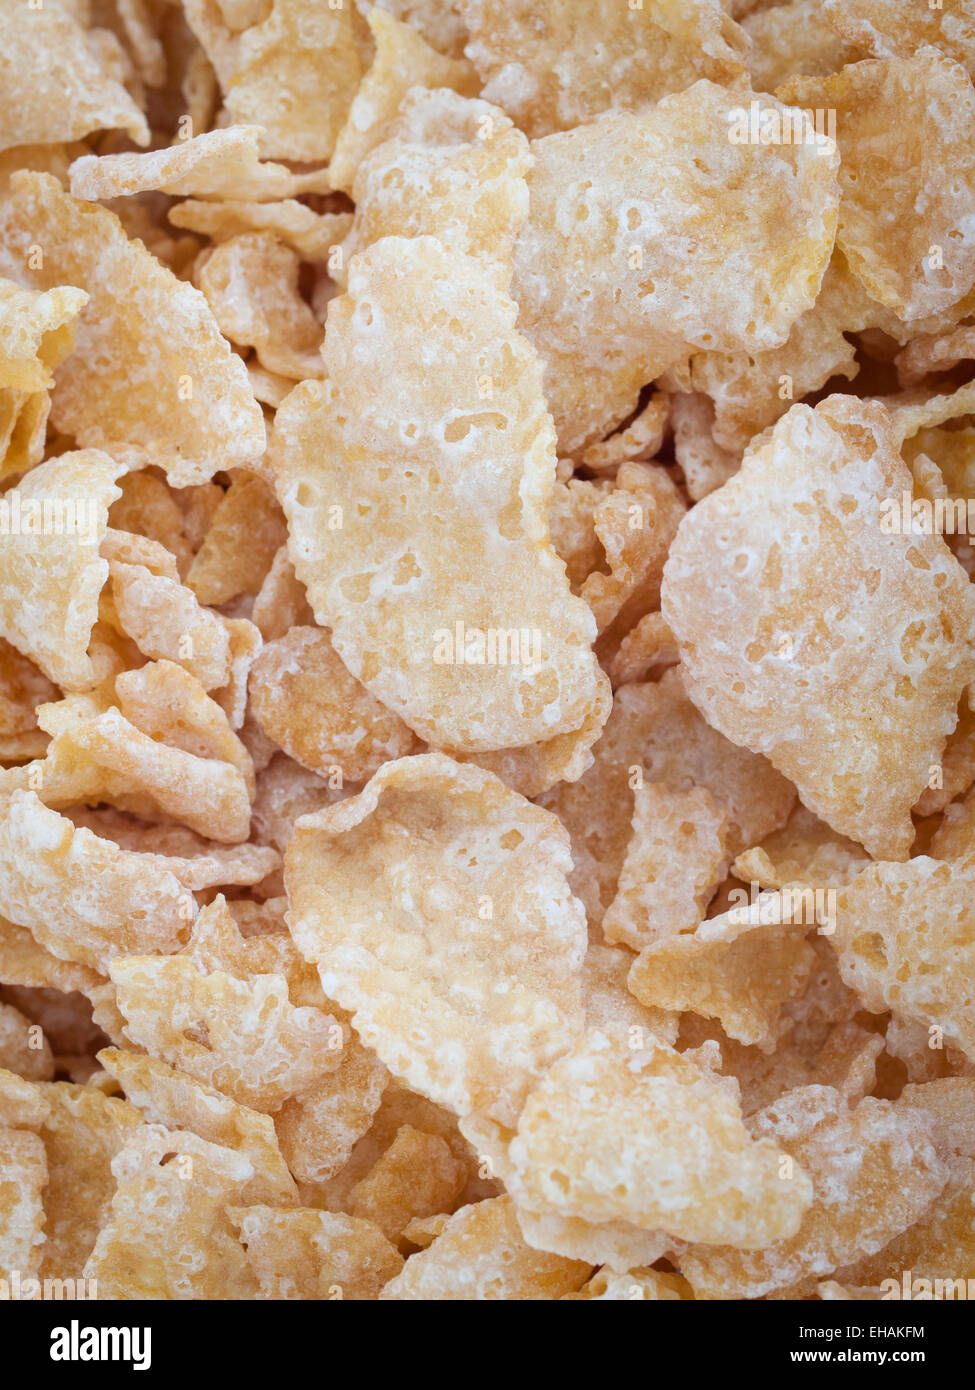 A close-up of Kellogg's Frosted Flakes cereal. Stock Photo